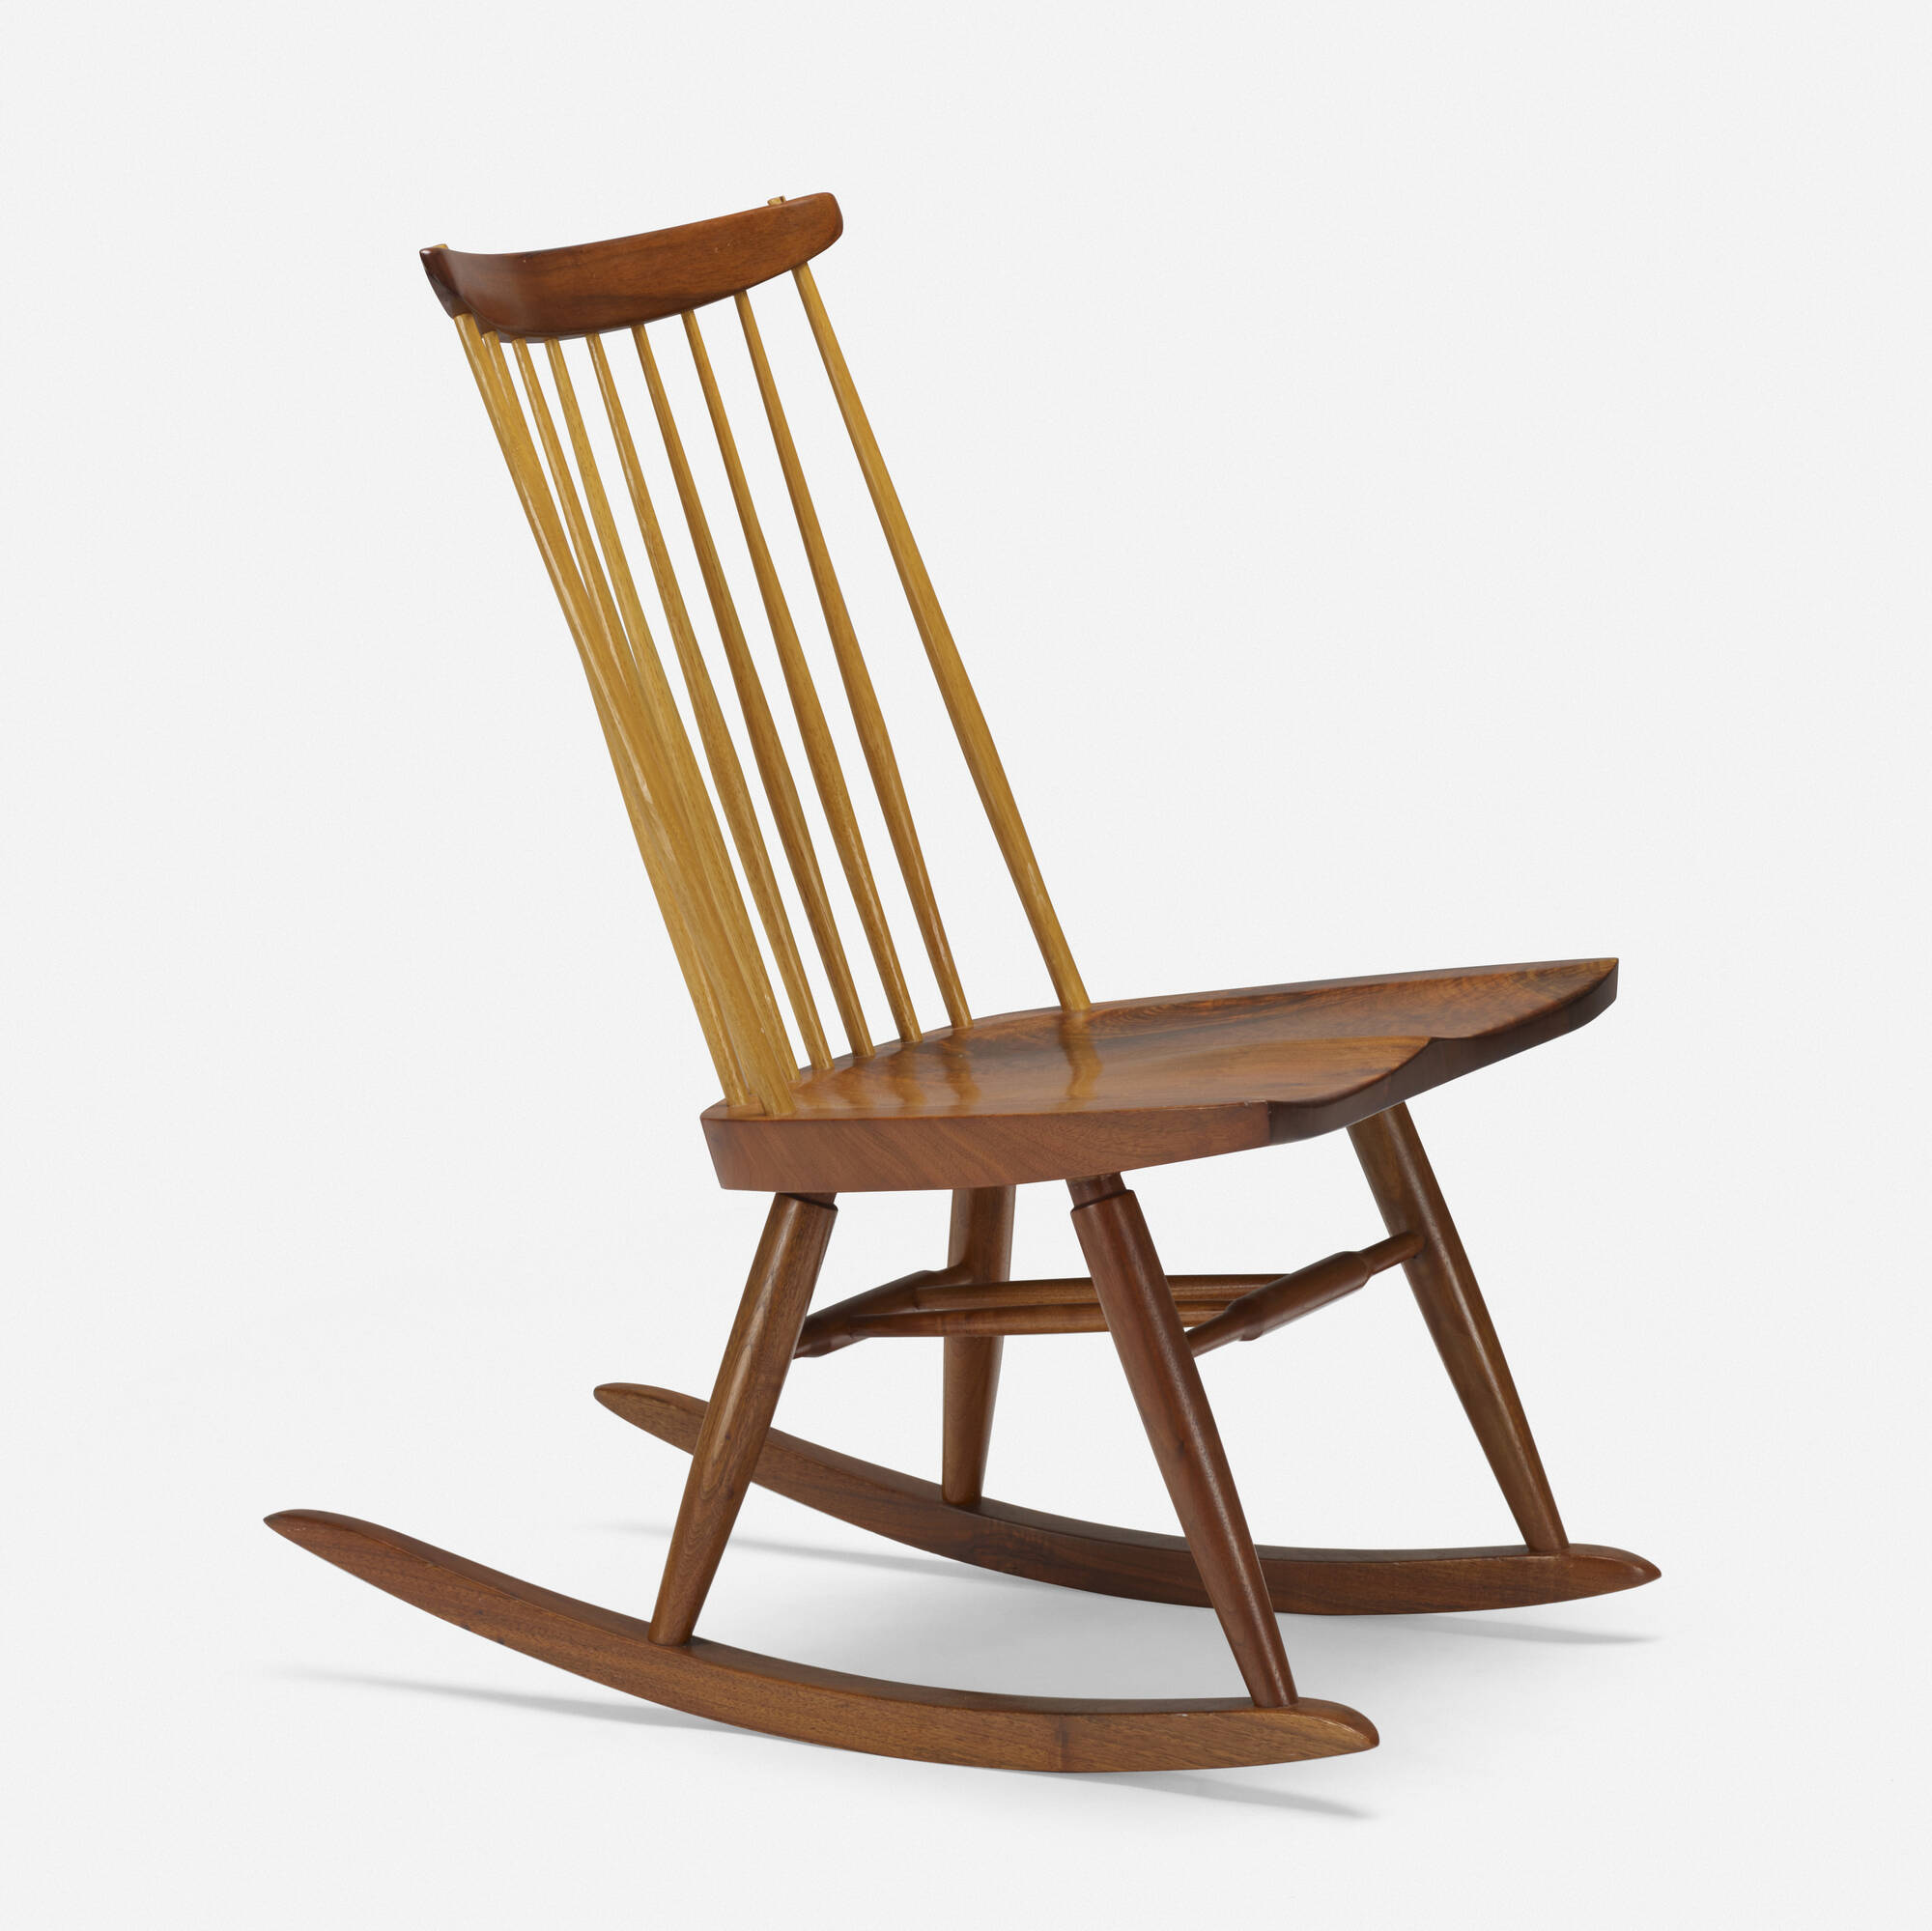 192: GEORGE NAKASHIMA, New Chair Rocker without Arms